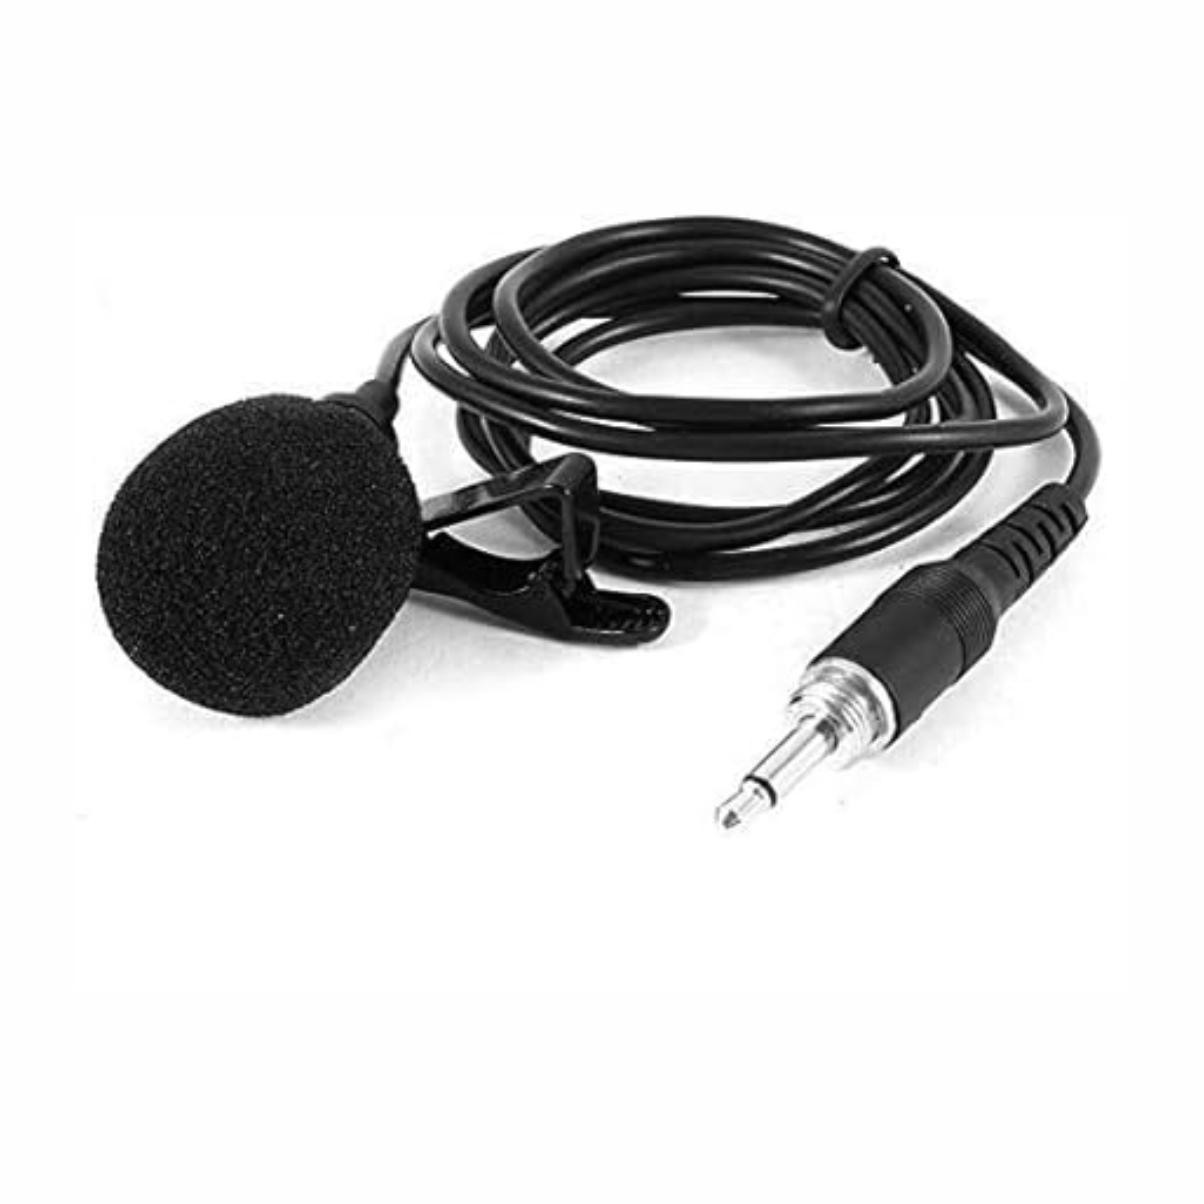 Gilary Collar Clip Mic 2.0m, Perfect for YouTube, Interviews, Podcasts